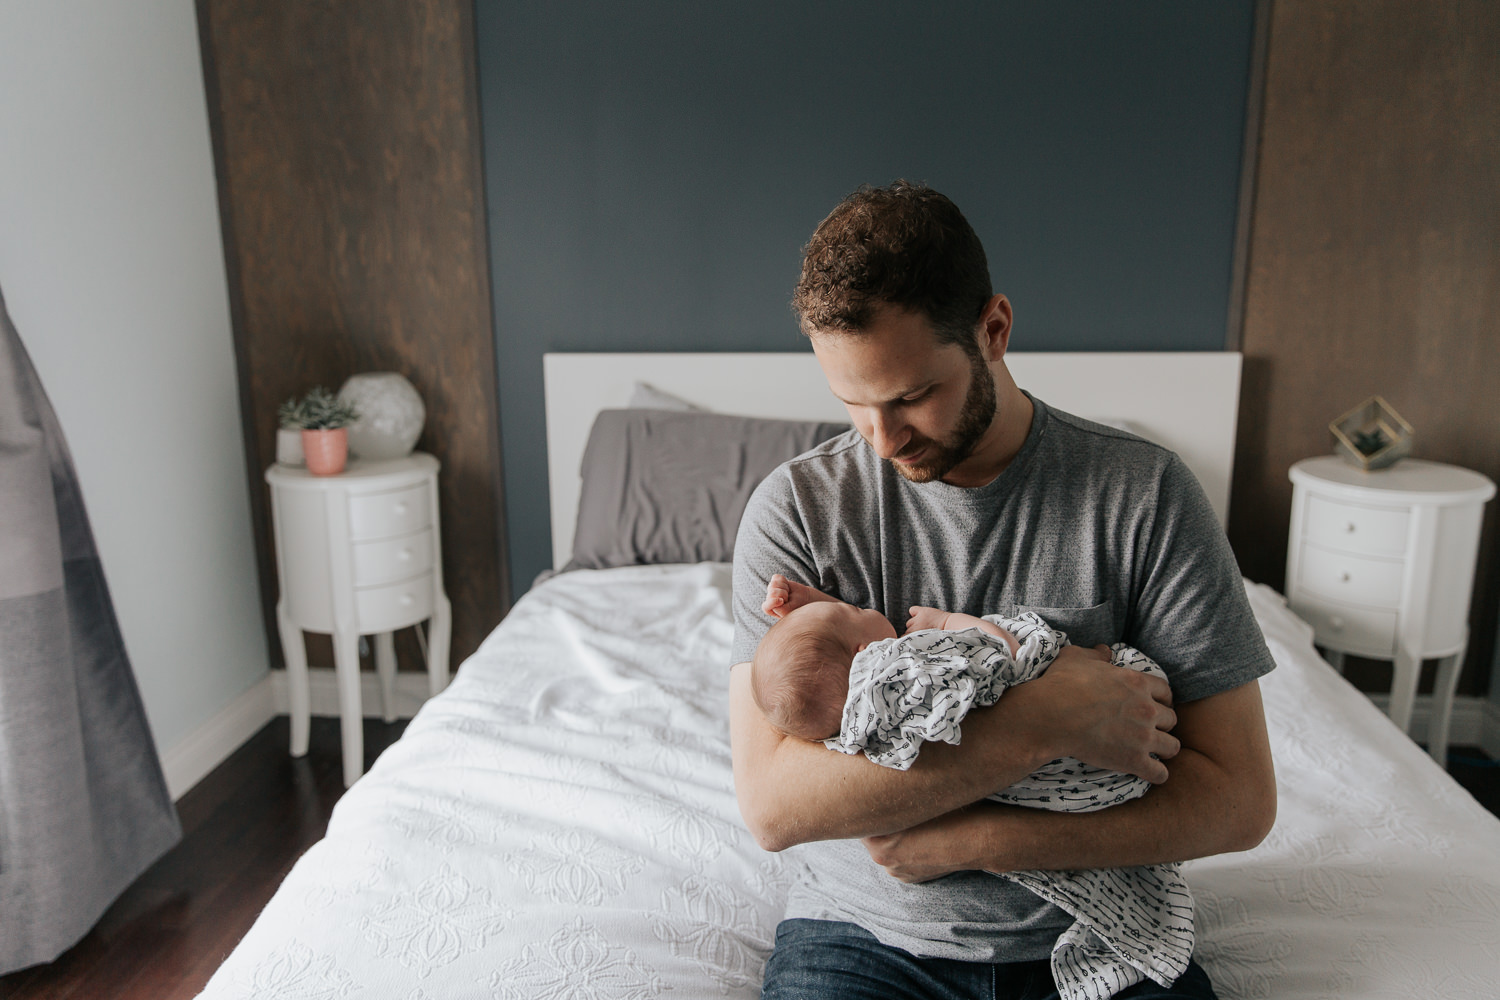 first time father with dark hair and beard in grey shirt sitting on edge of master bed holding sleeping 2 week old baby girl with light hair wrapped in swaddle - Markham In-Home Photos